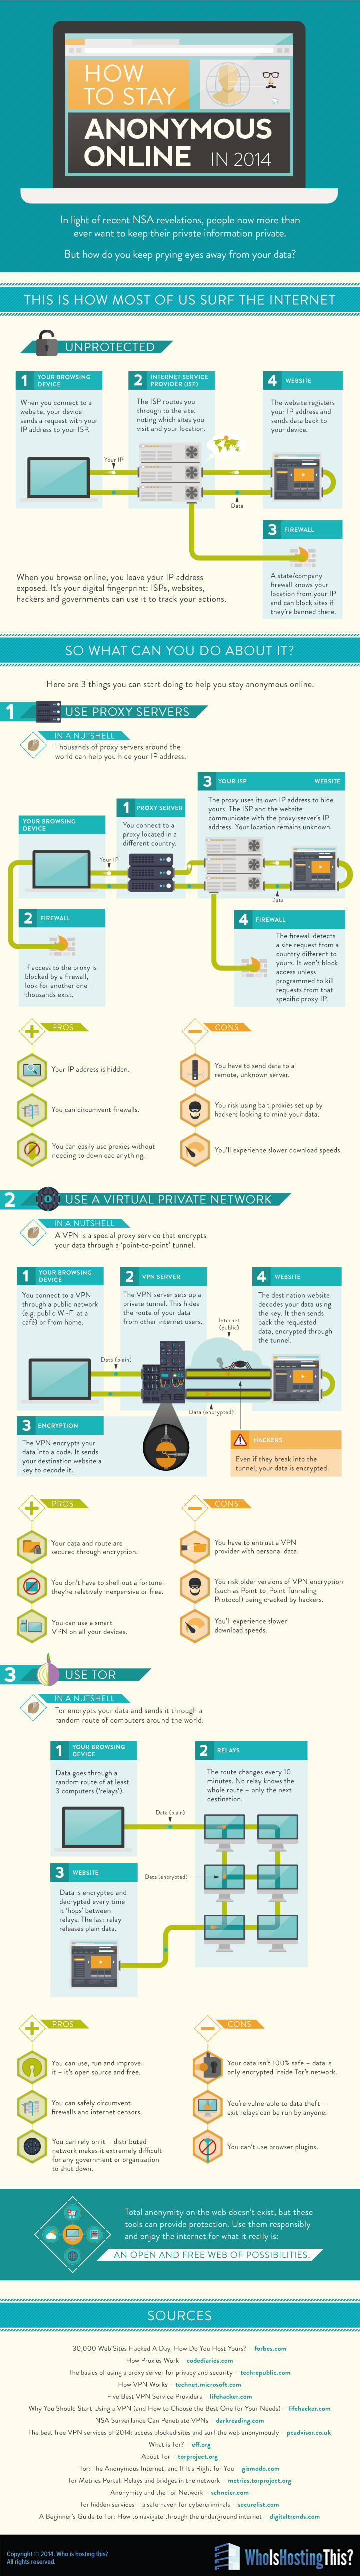 how-to-stay-anonymous-online-infographic